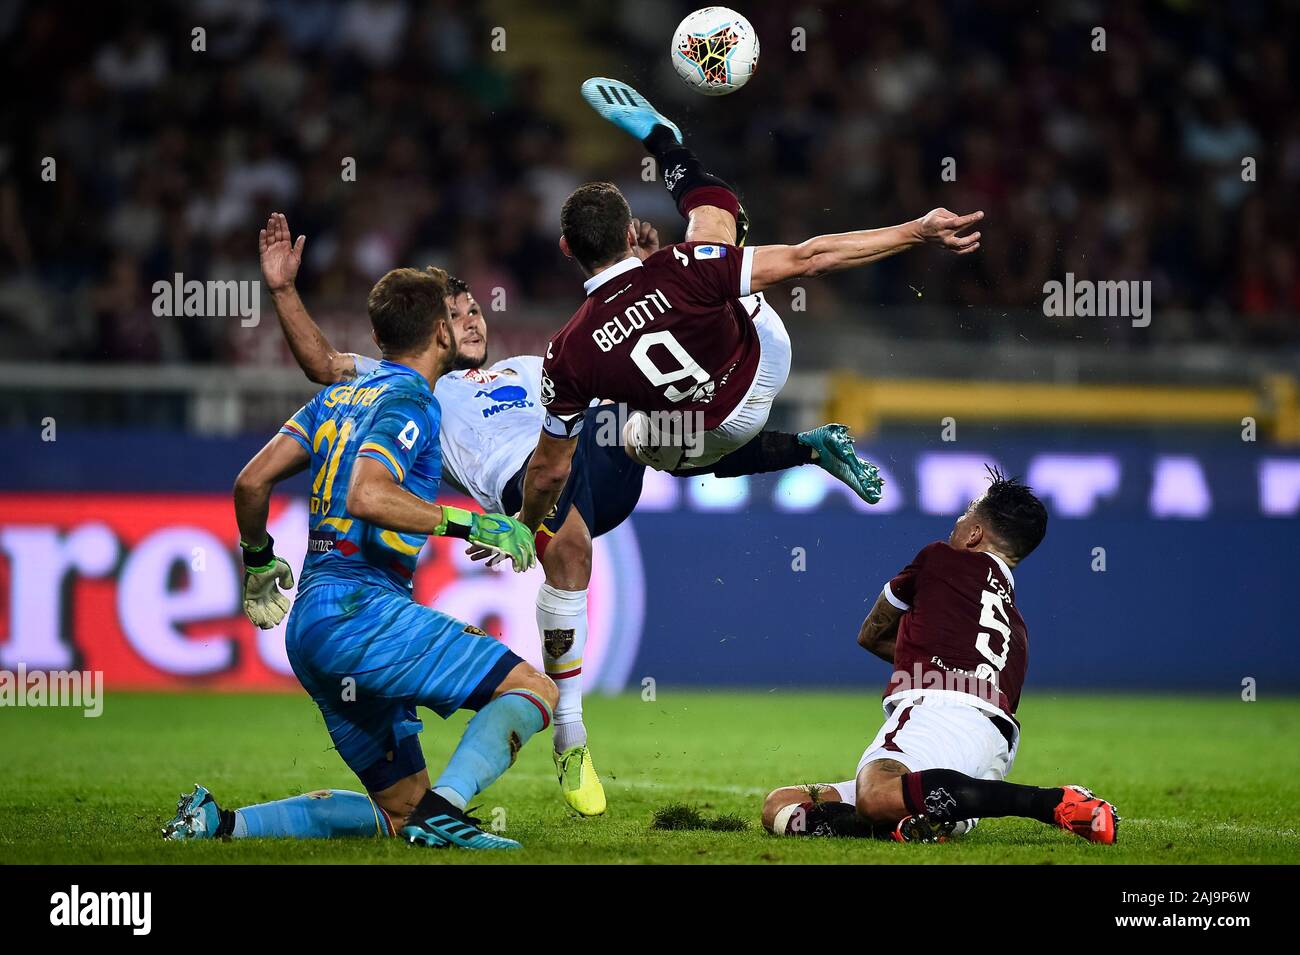 Turin, Italy. 16 September, 2019: Andrea Belotti (C) of Torino FC attempts a bicycle kick during the Serie A football match between Torino FC and US Lecce. US Lecce won 2-1 over Torino FC. Credit: Nicolò Campo/Alamy Live News Stock Photo